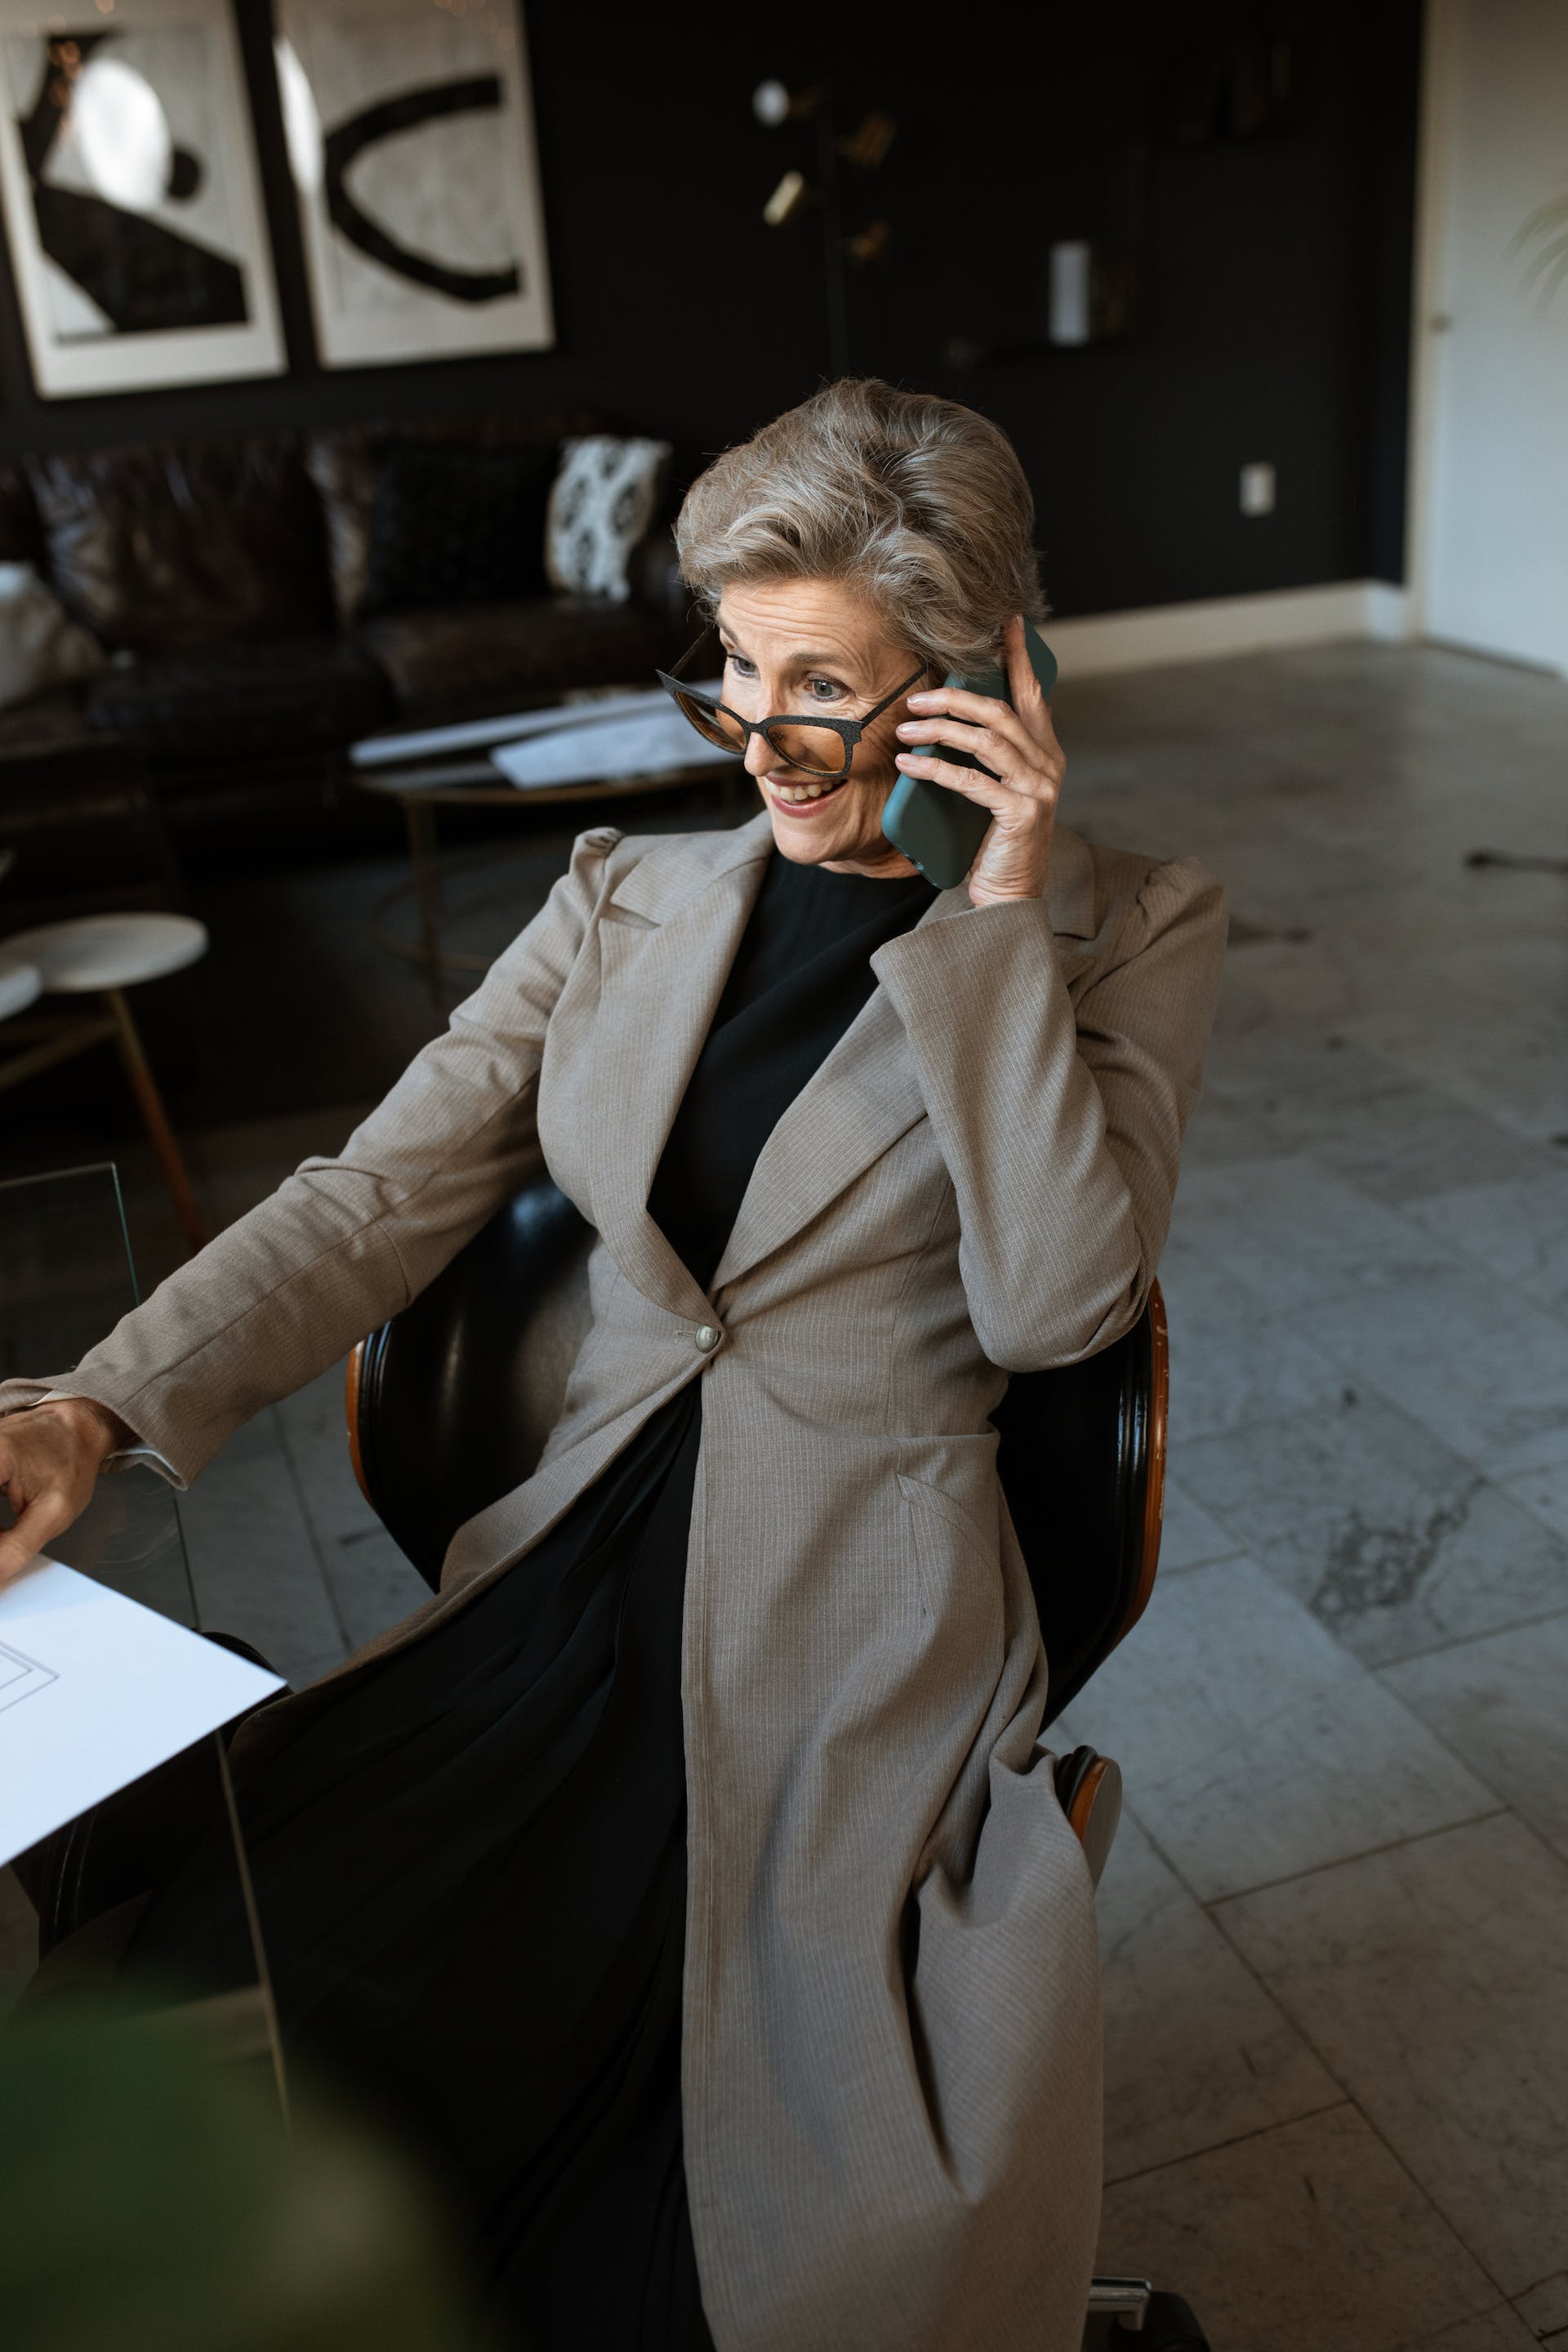 An elderly woman in a gray coat sitting while talking on the phone | Source: Pexels